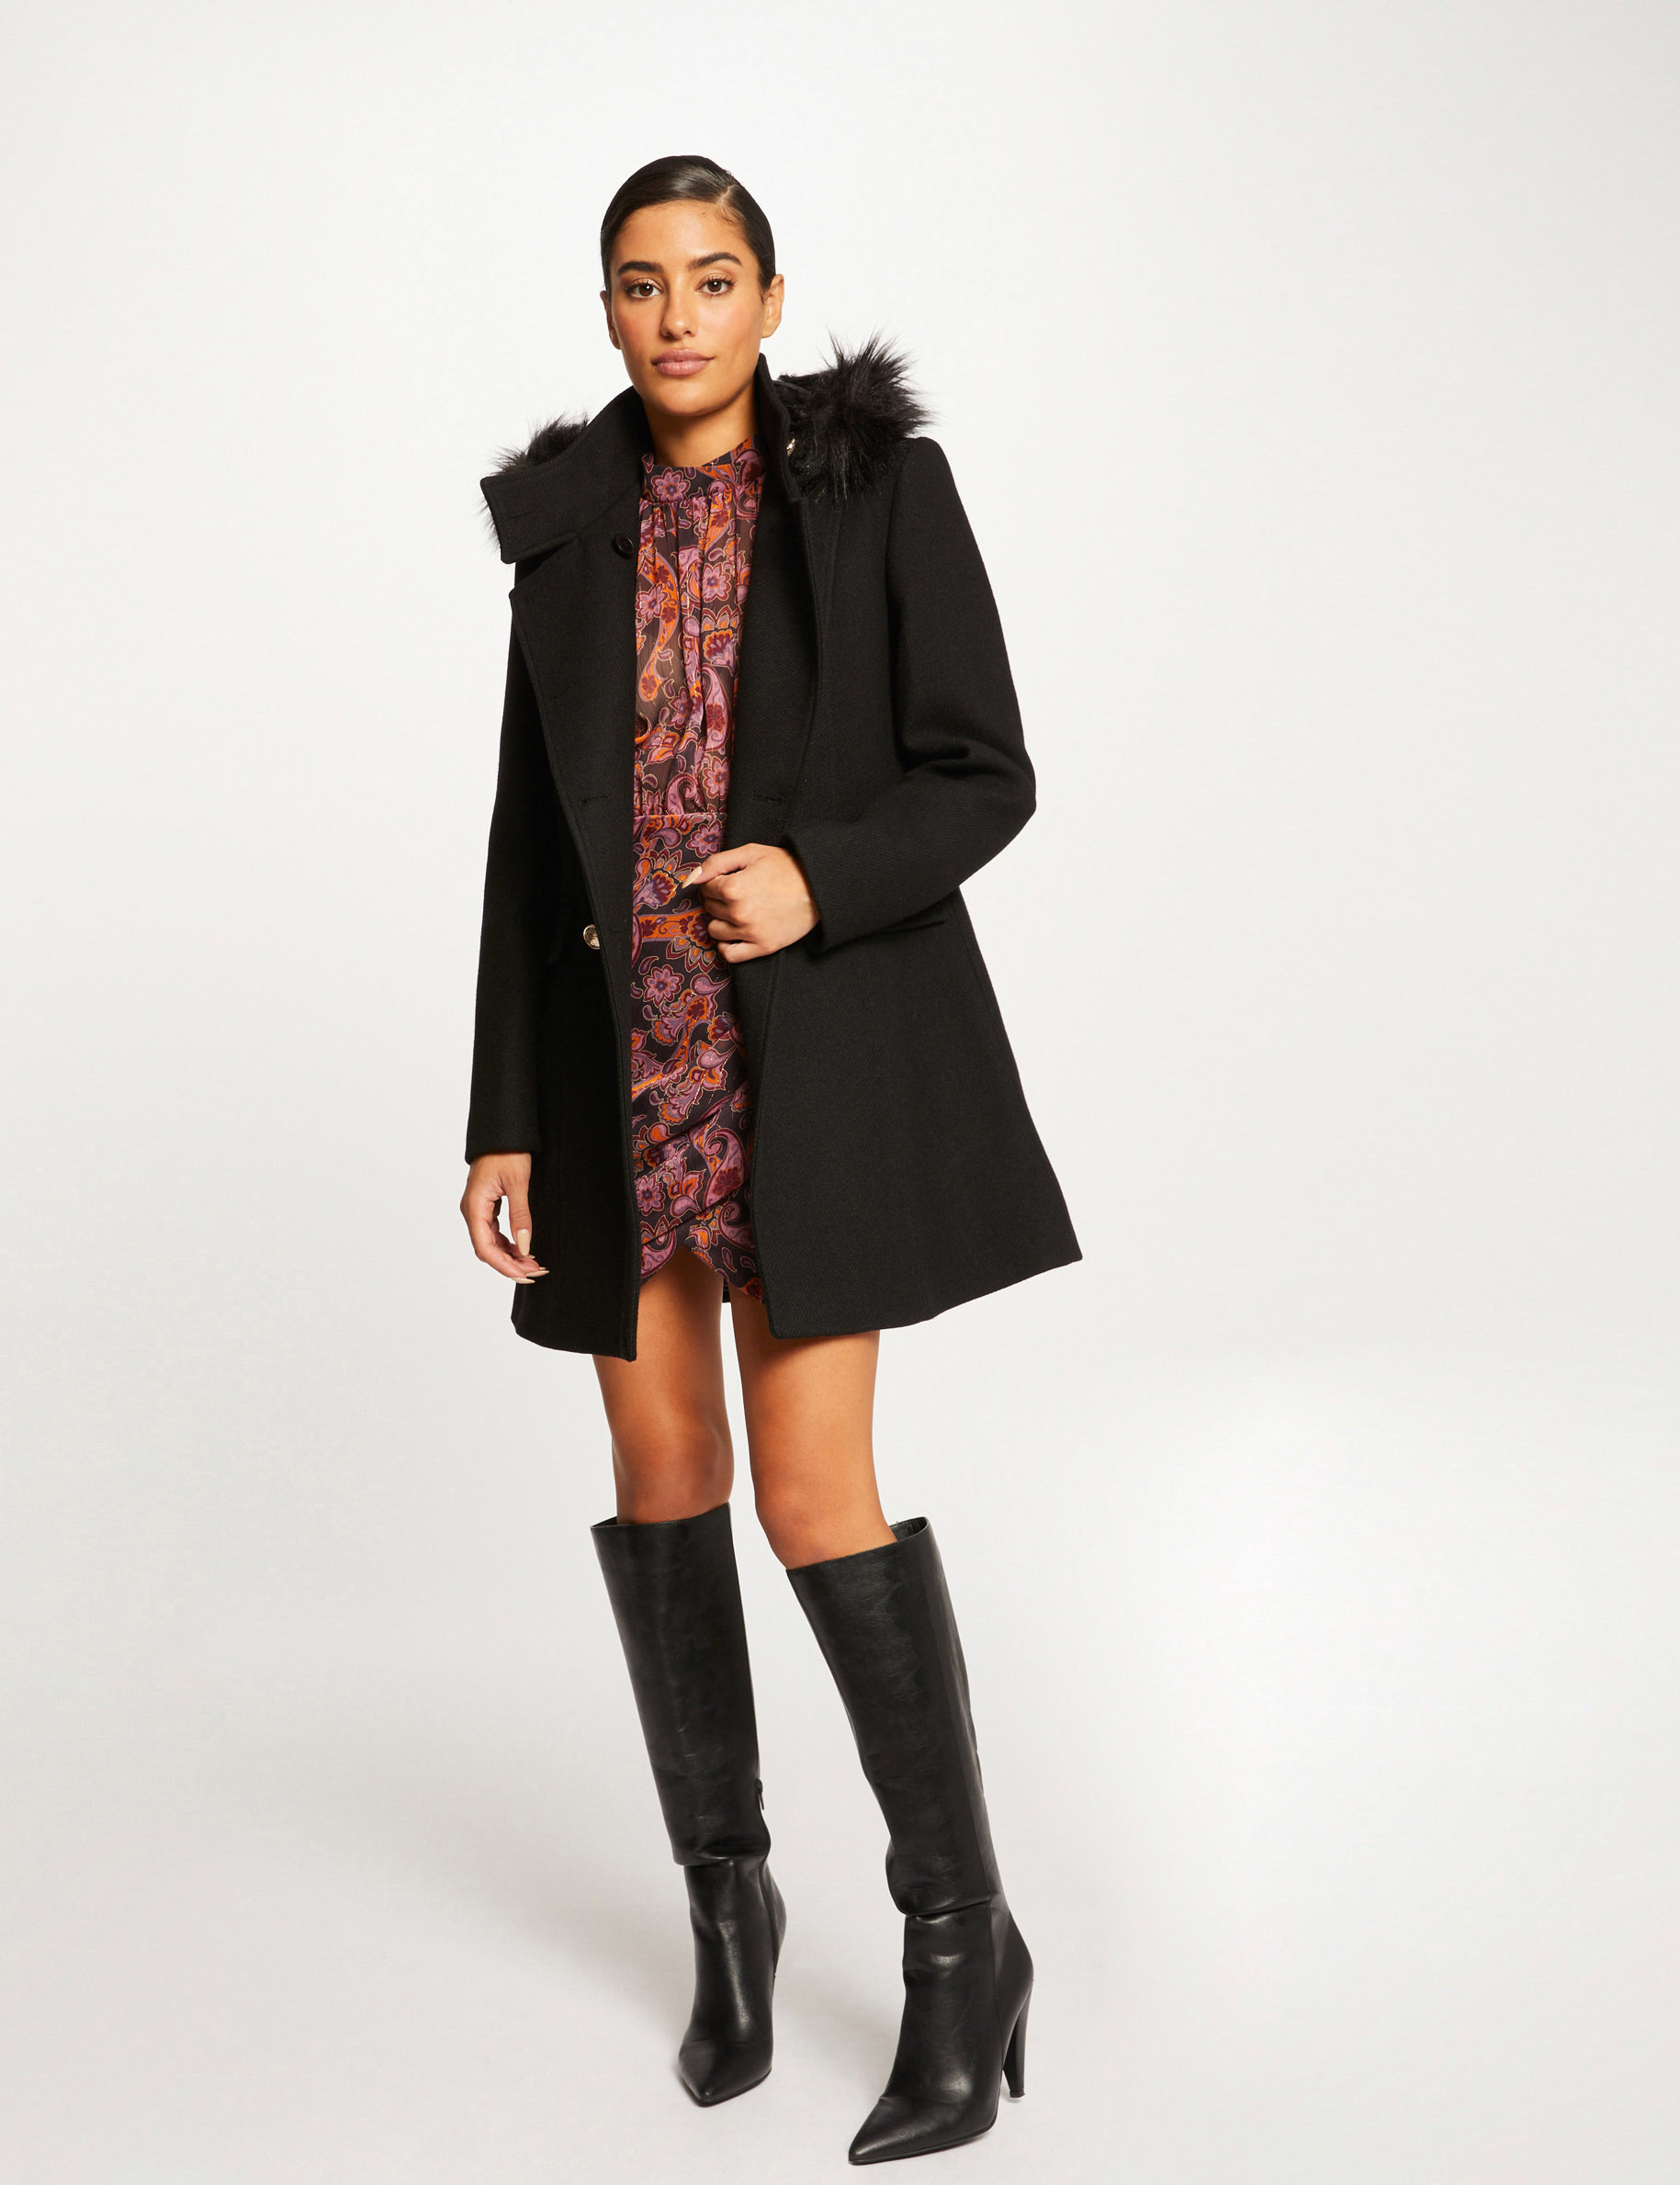 Loose buttoned coat with hood black ladies'